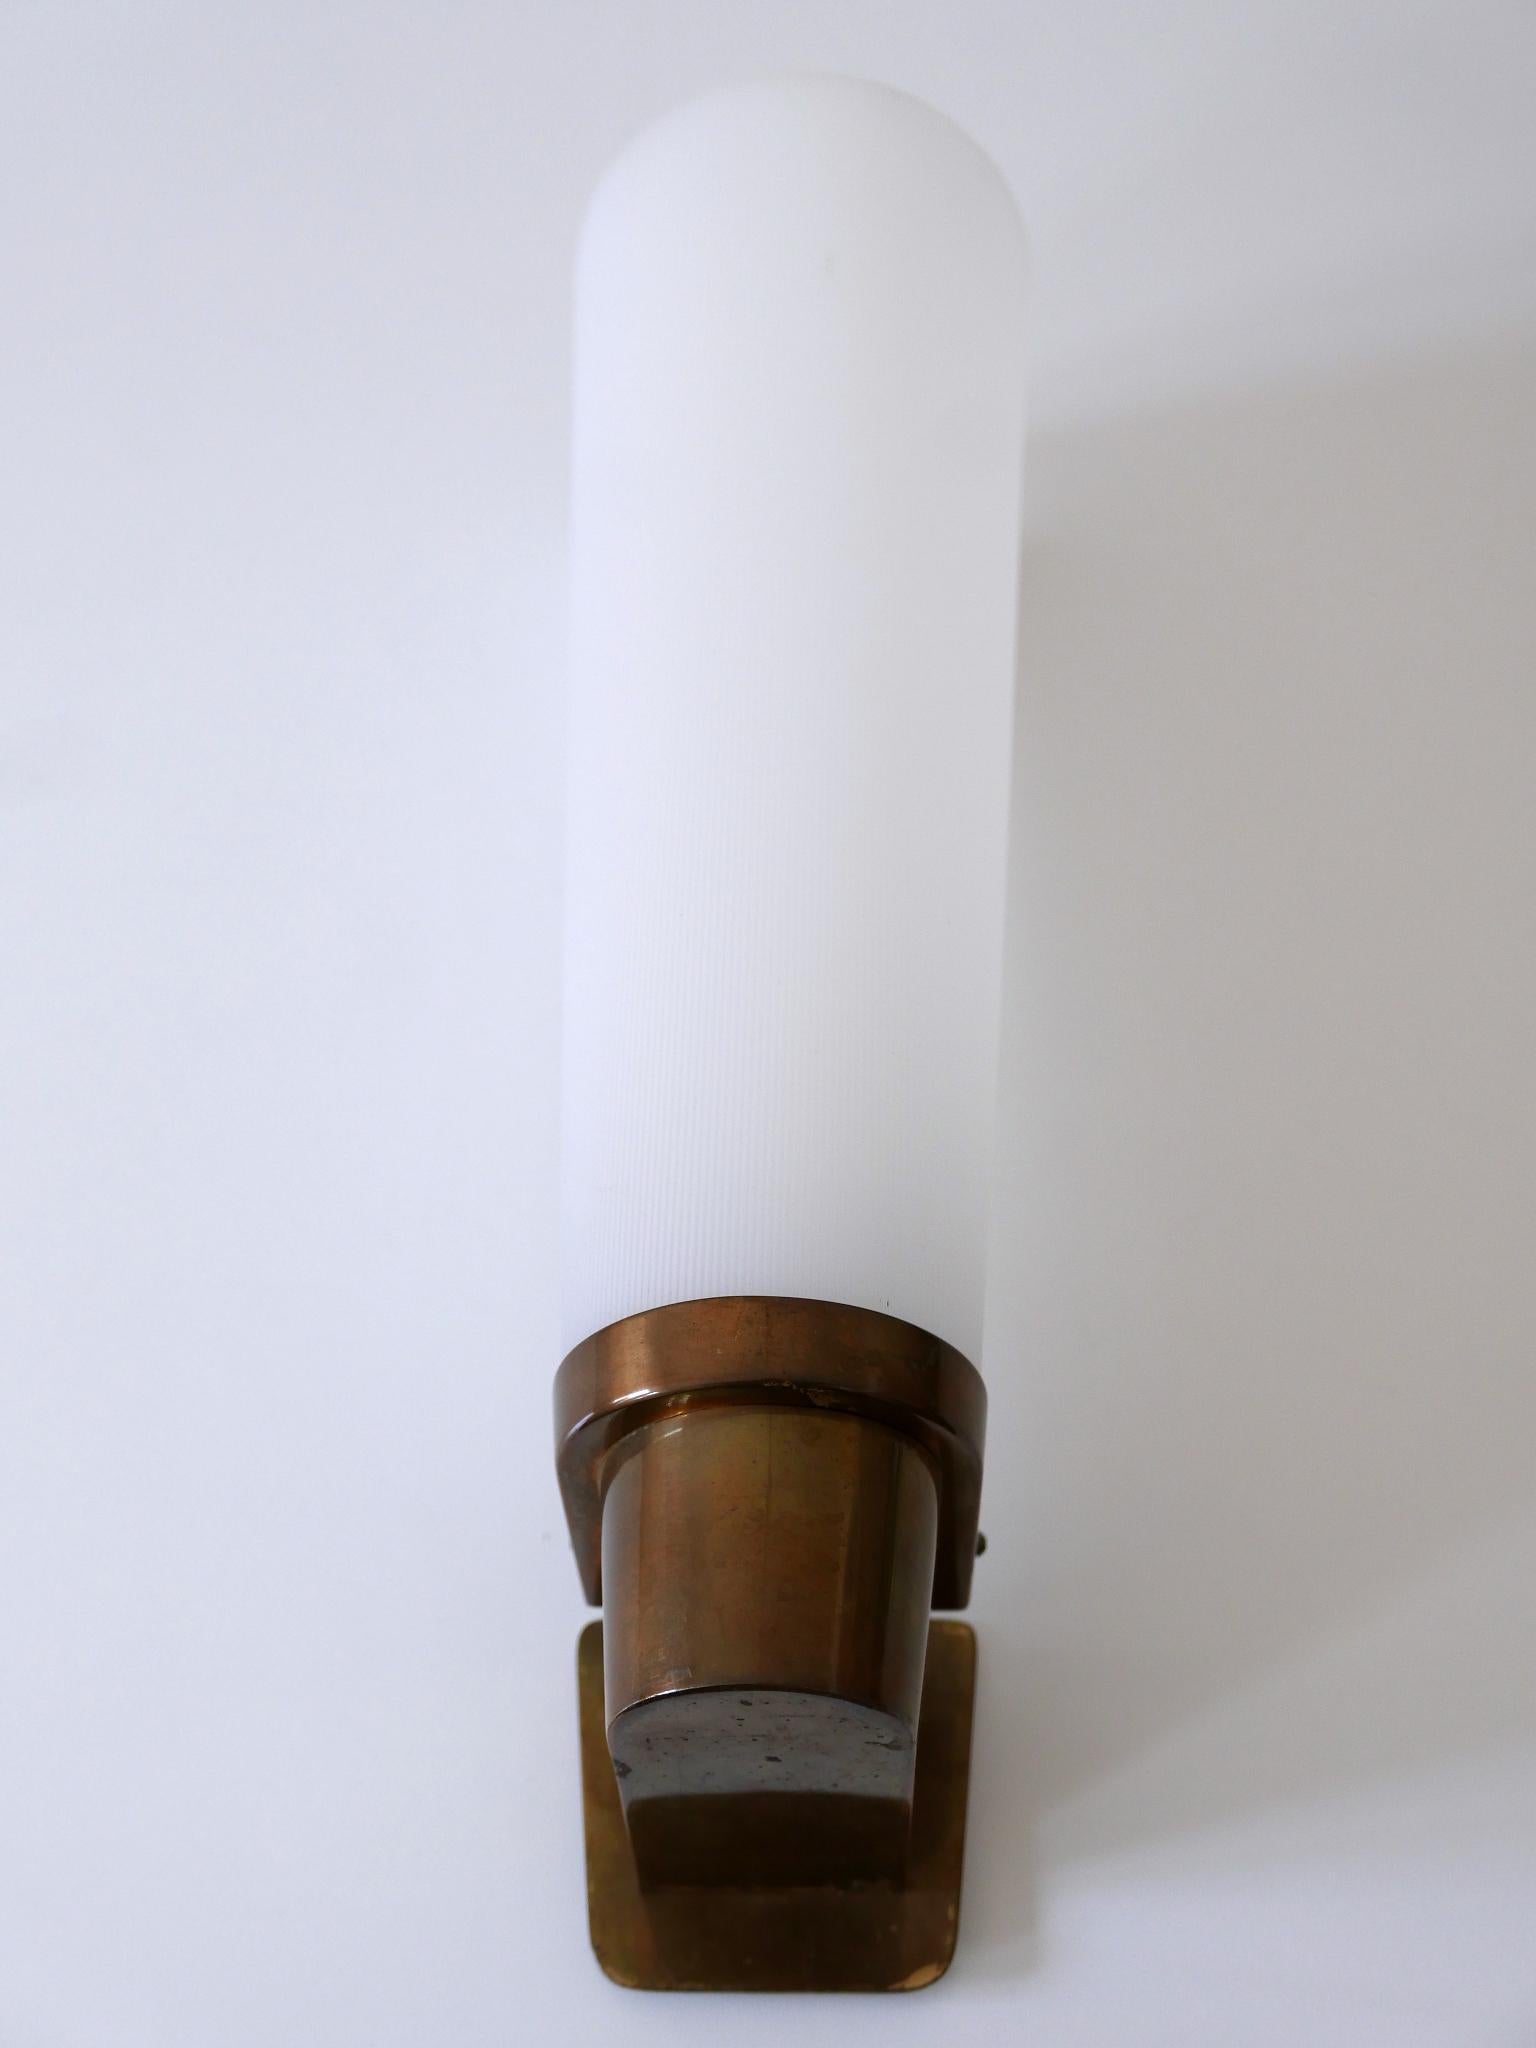 Large Mid-Century Modern Brass & Acrylic Wall Light or Sconce Germany 1950s For Sale 4